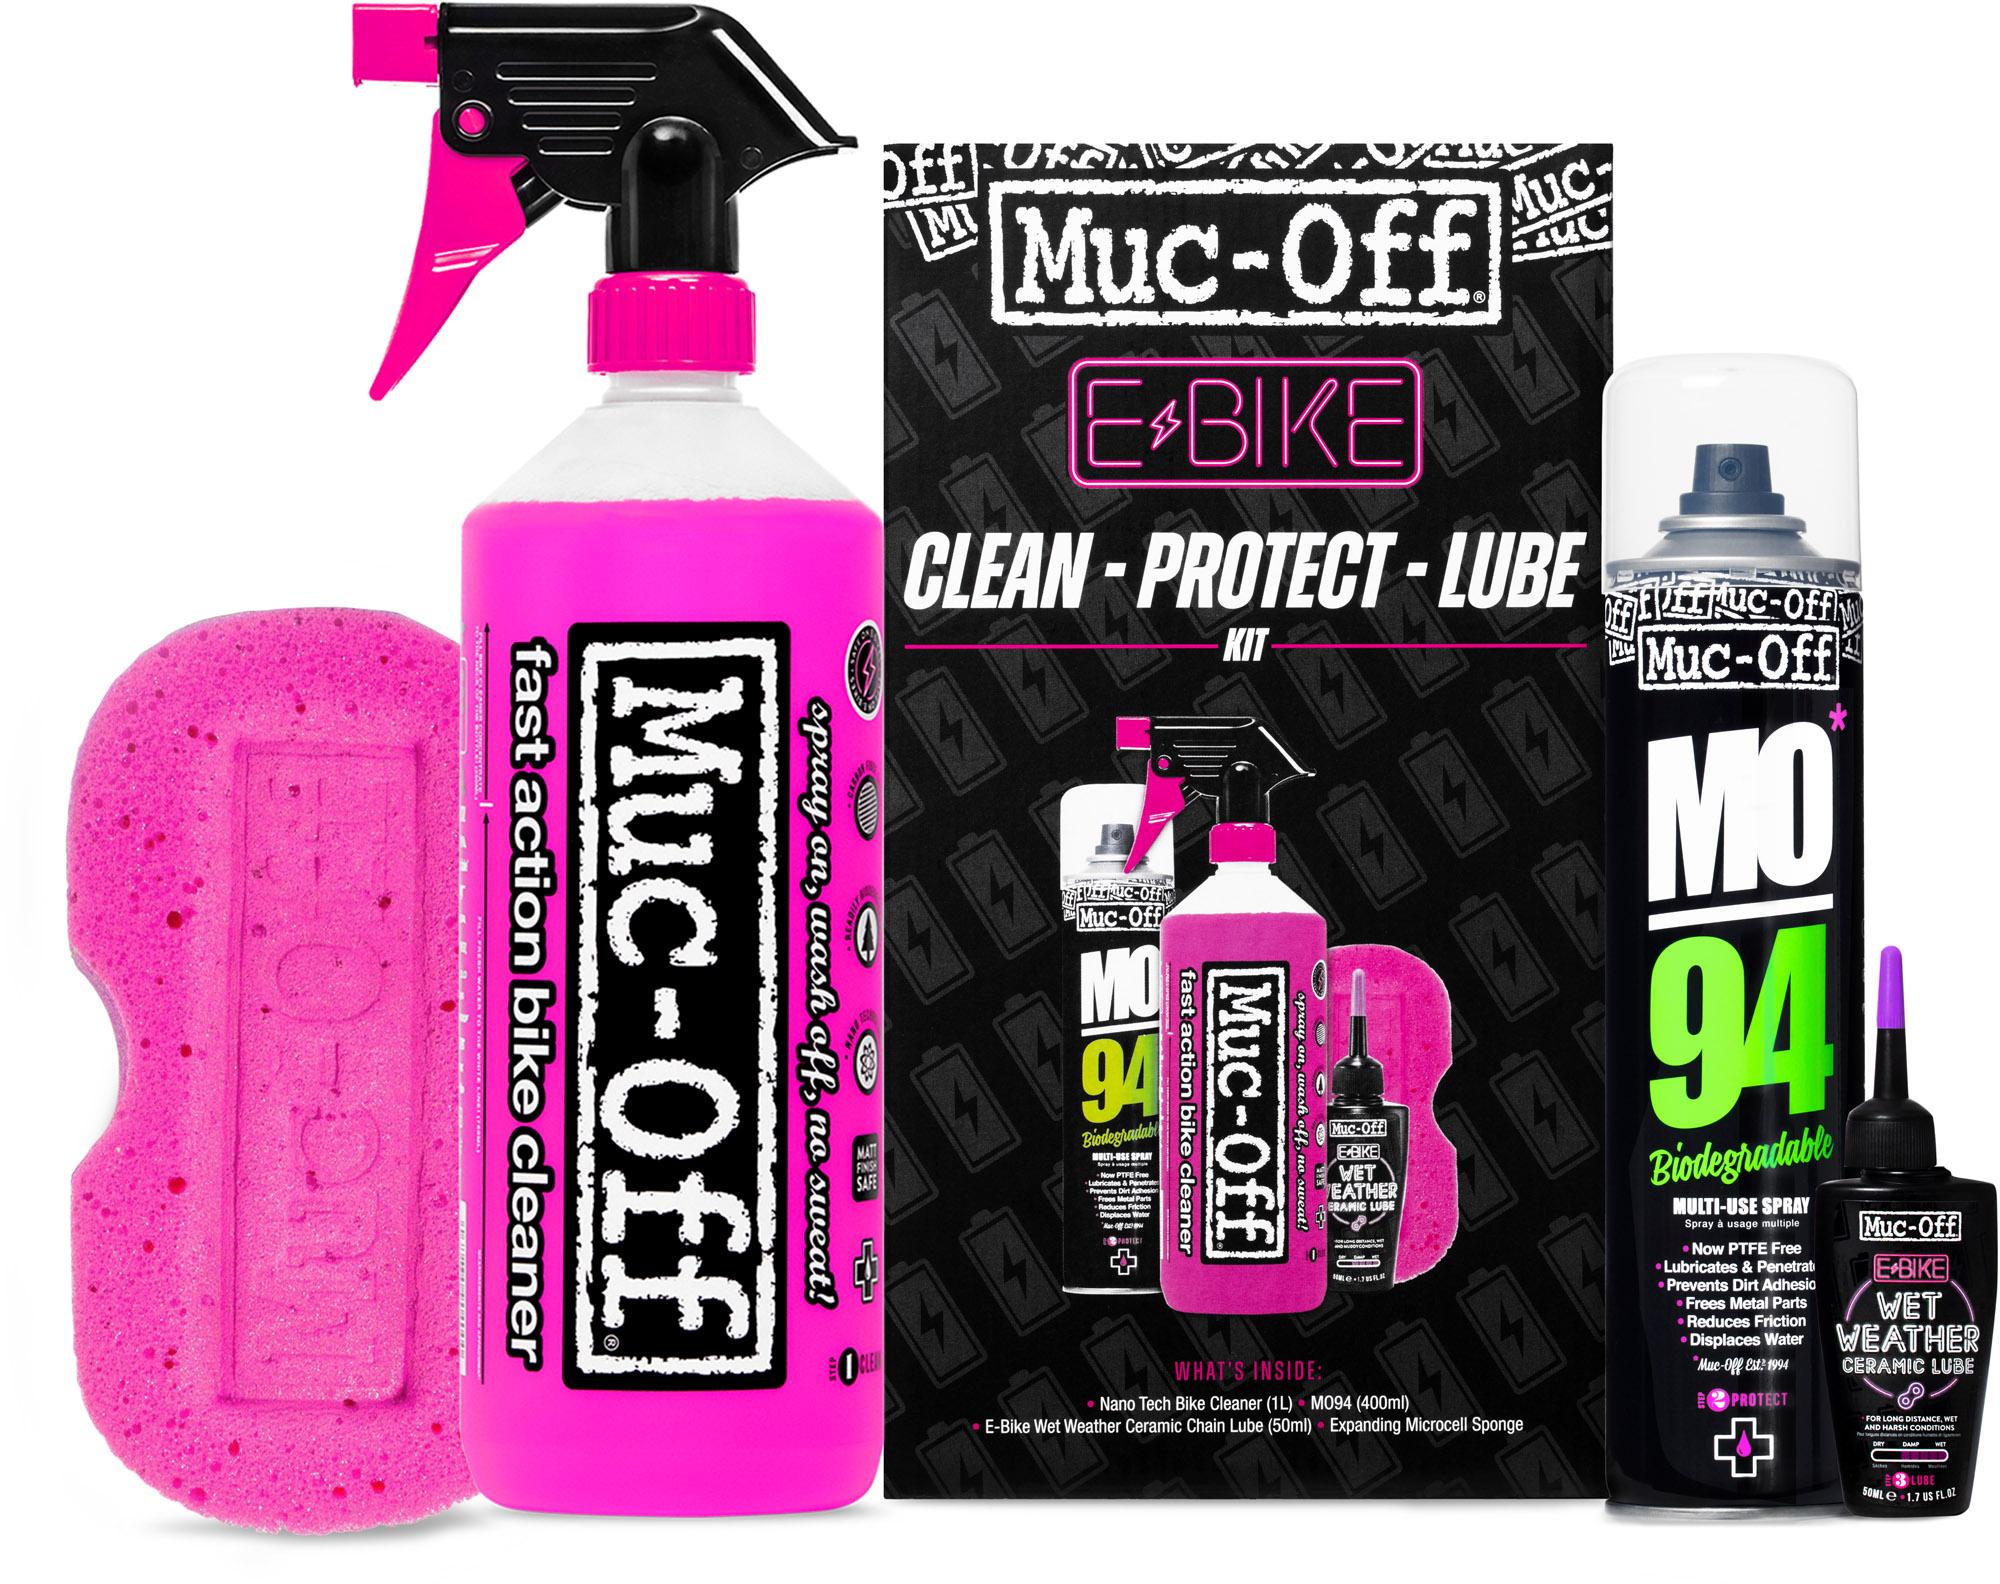 Muc-off Ebike Clean - Protect And Lube Kit  Black